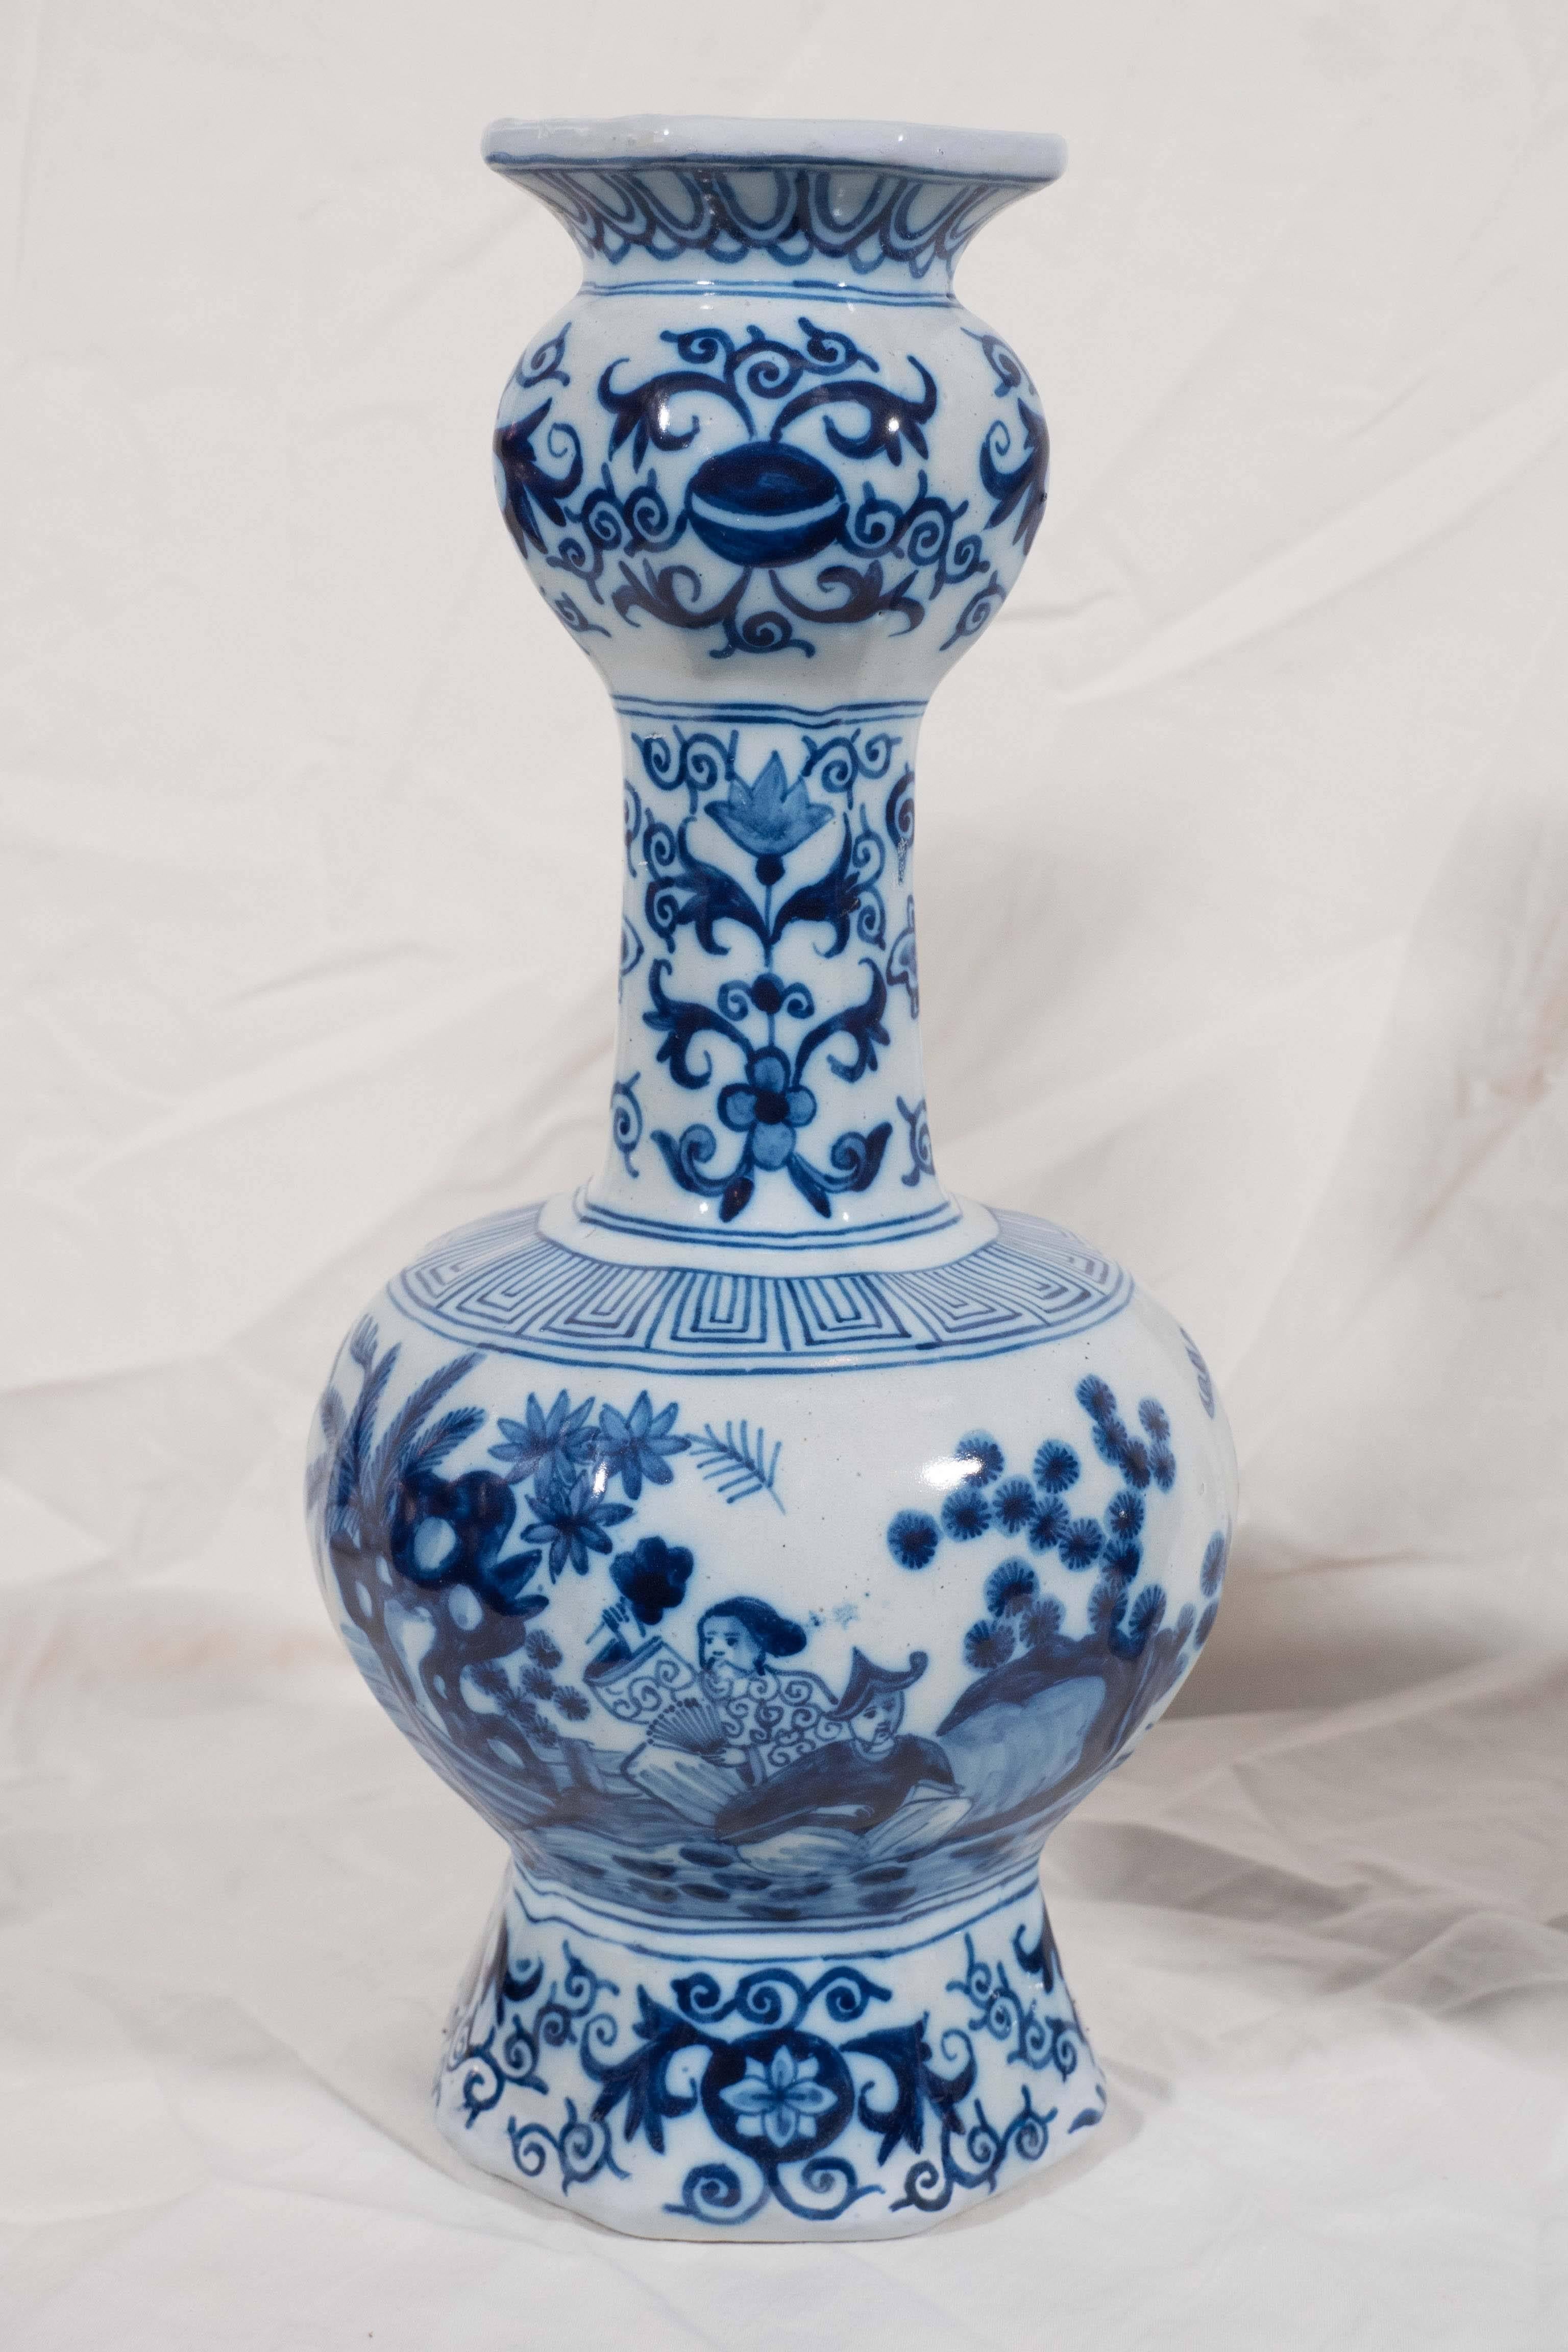 A pair of Dutch delft blue and white vases decorated with a beautiful chinoiserie garden scene with Mandarins, decorations of scrolling vines, and geometric designs.